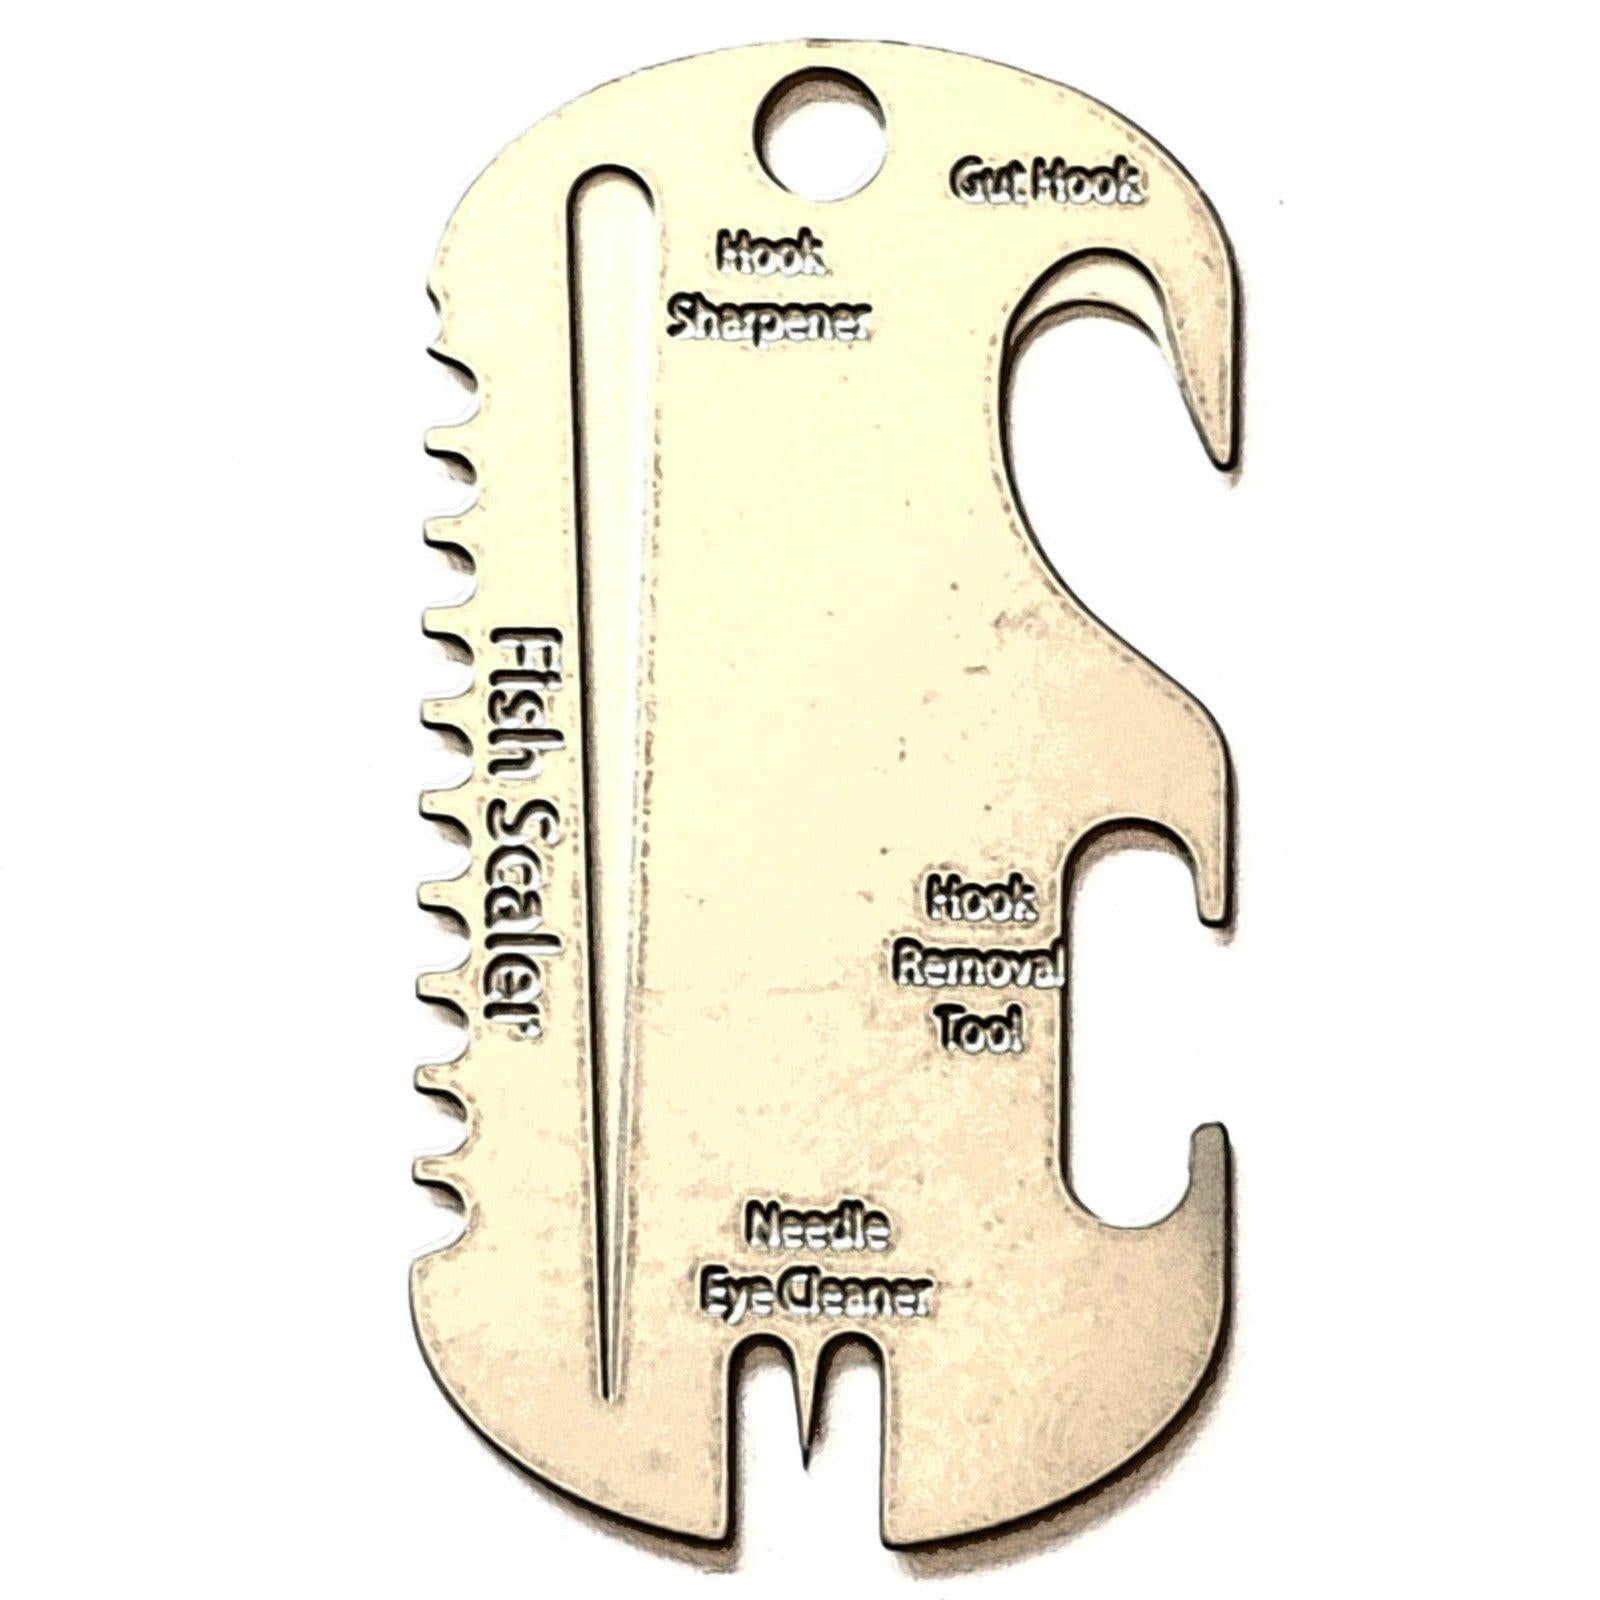 Sewing Kit Dog Tag: Survival Sewing Necklace